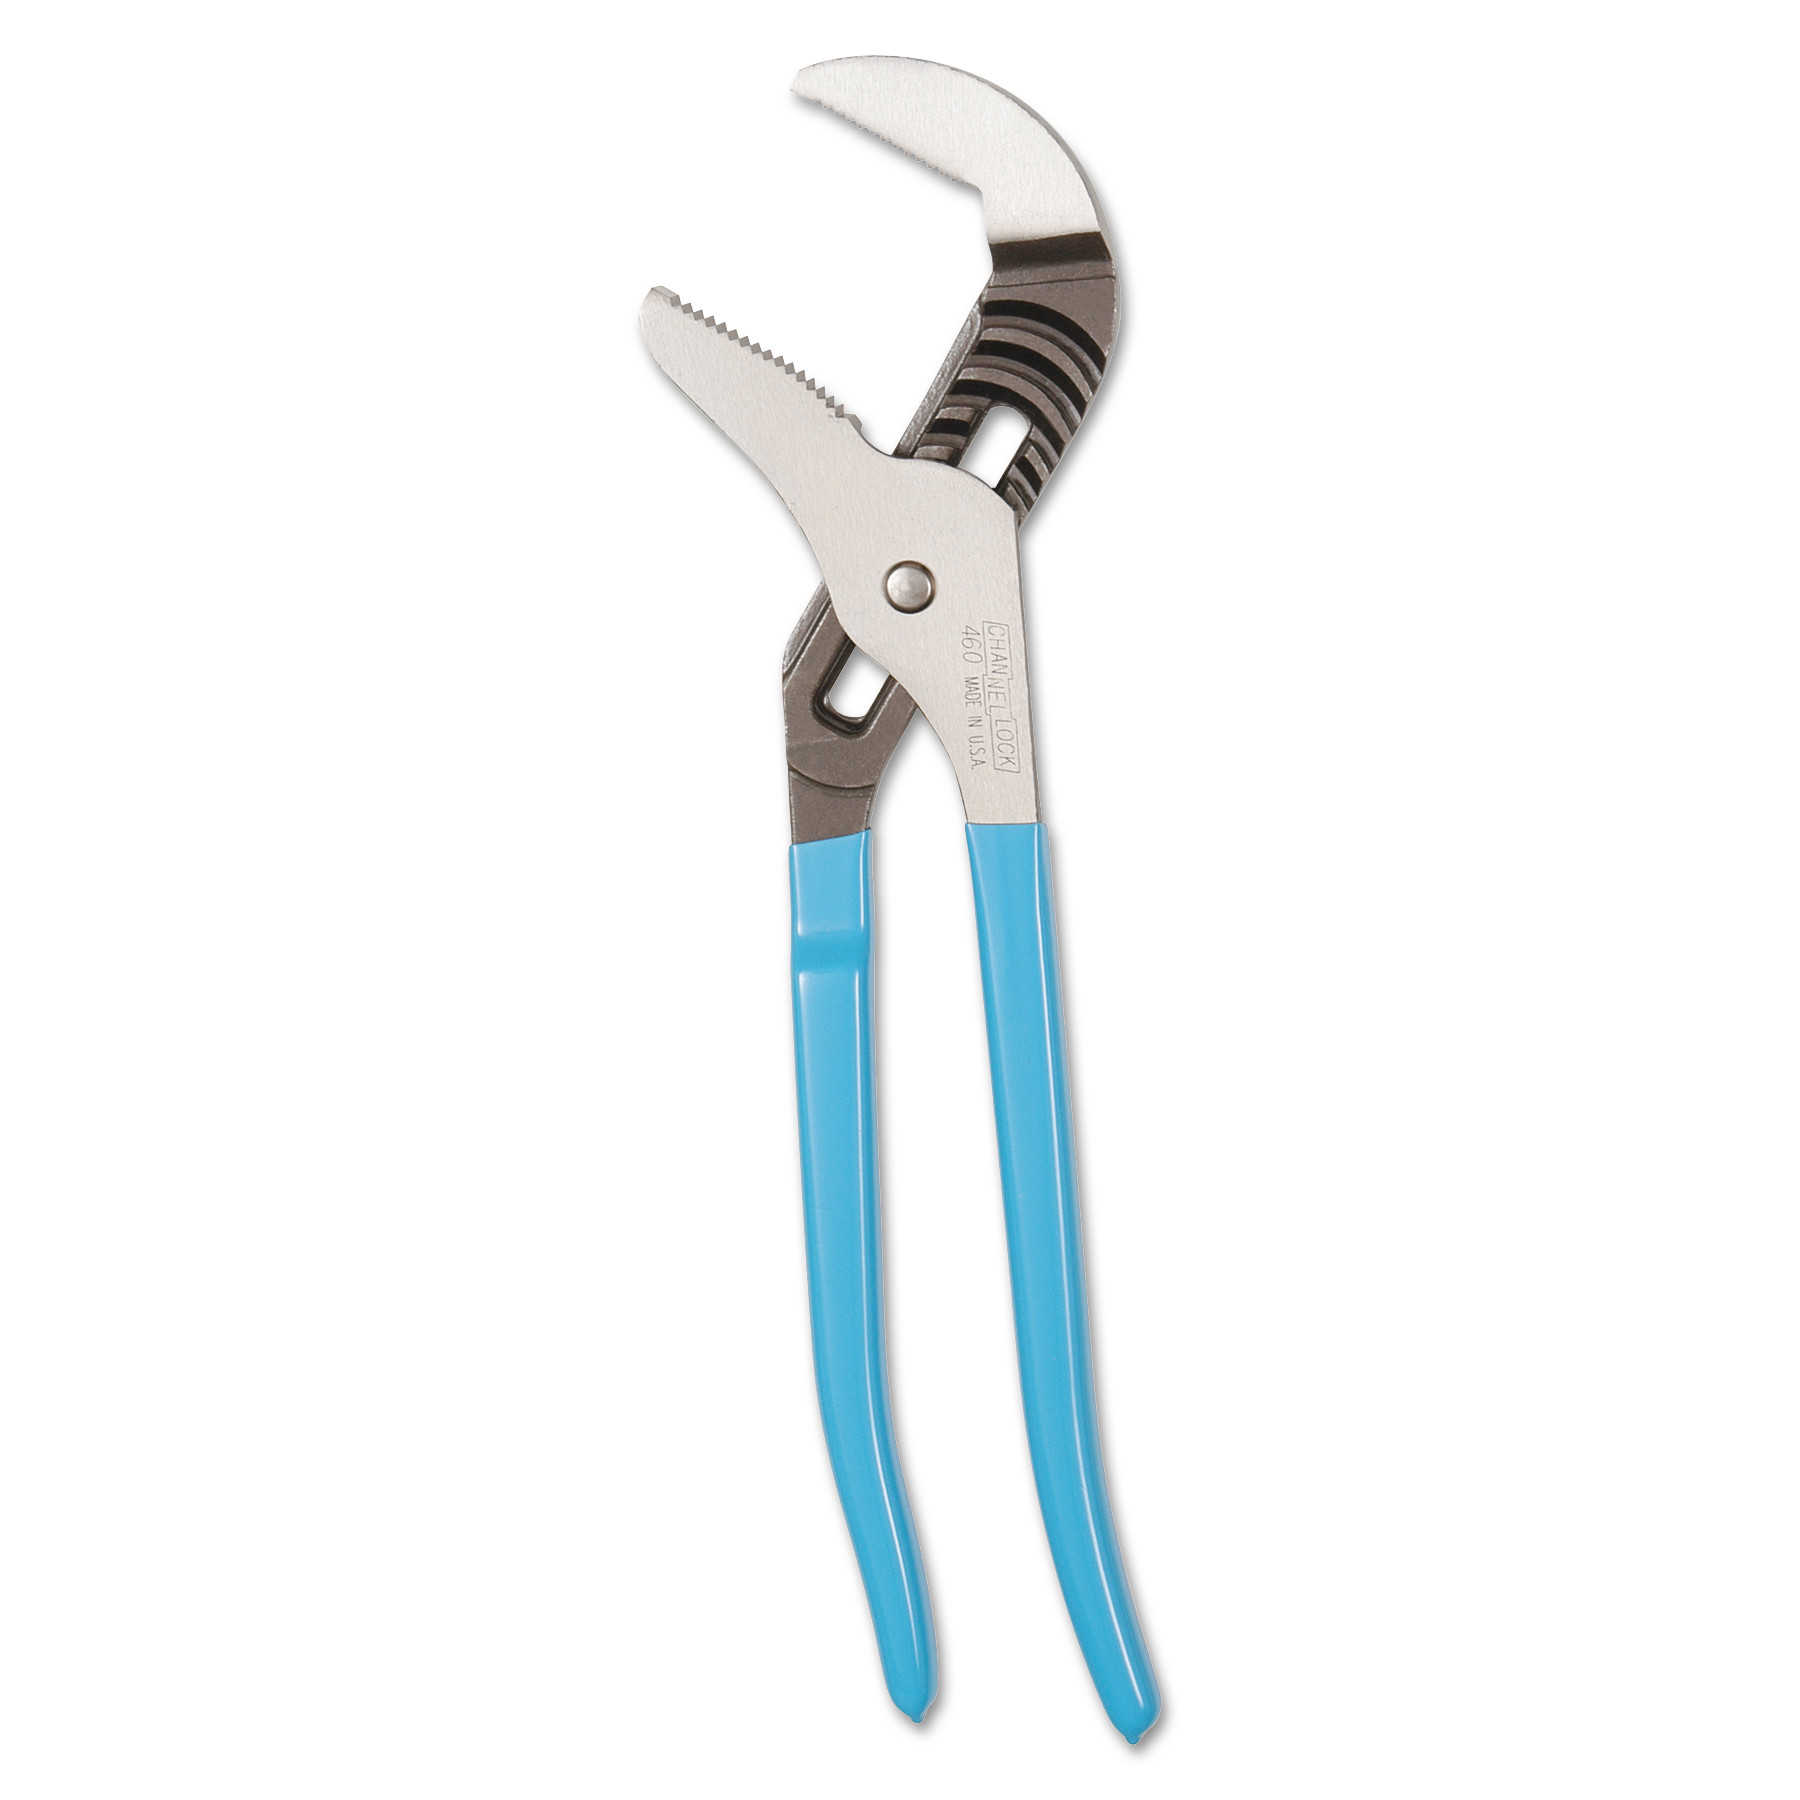 Channellock Straight Jaw Tongue and Groove Pliers, 16 1/2 in, Straight, 8 Adj.